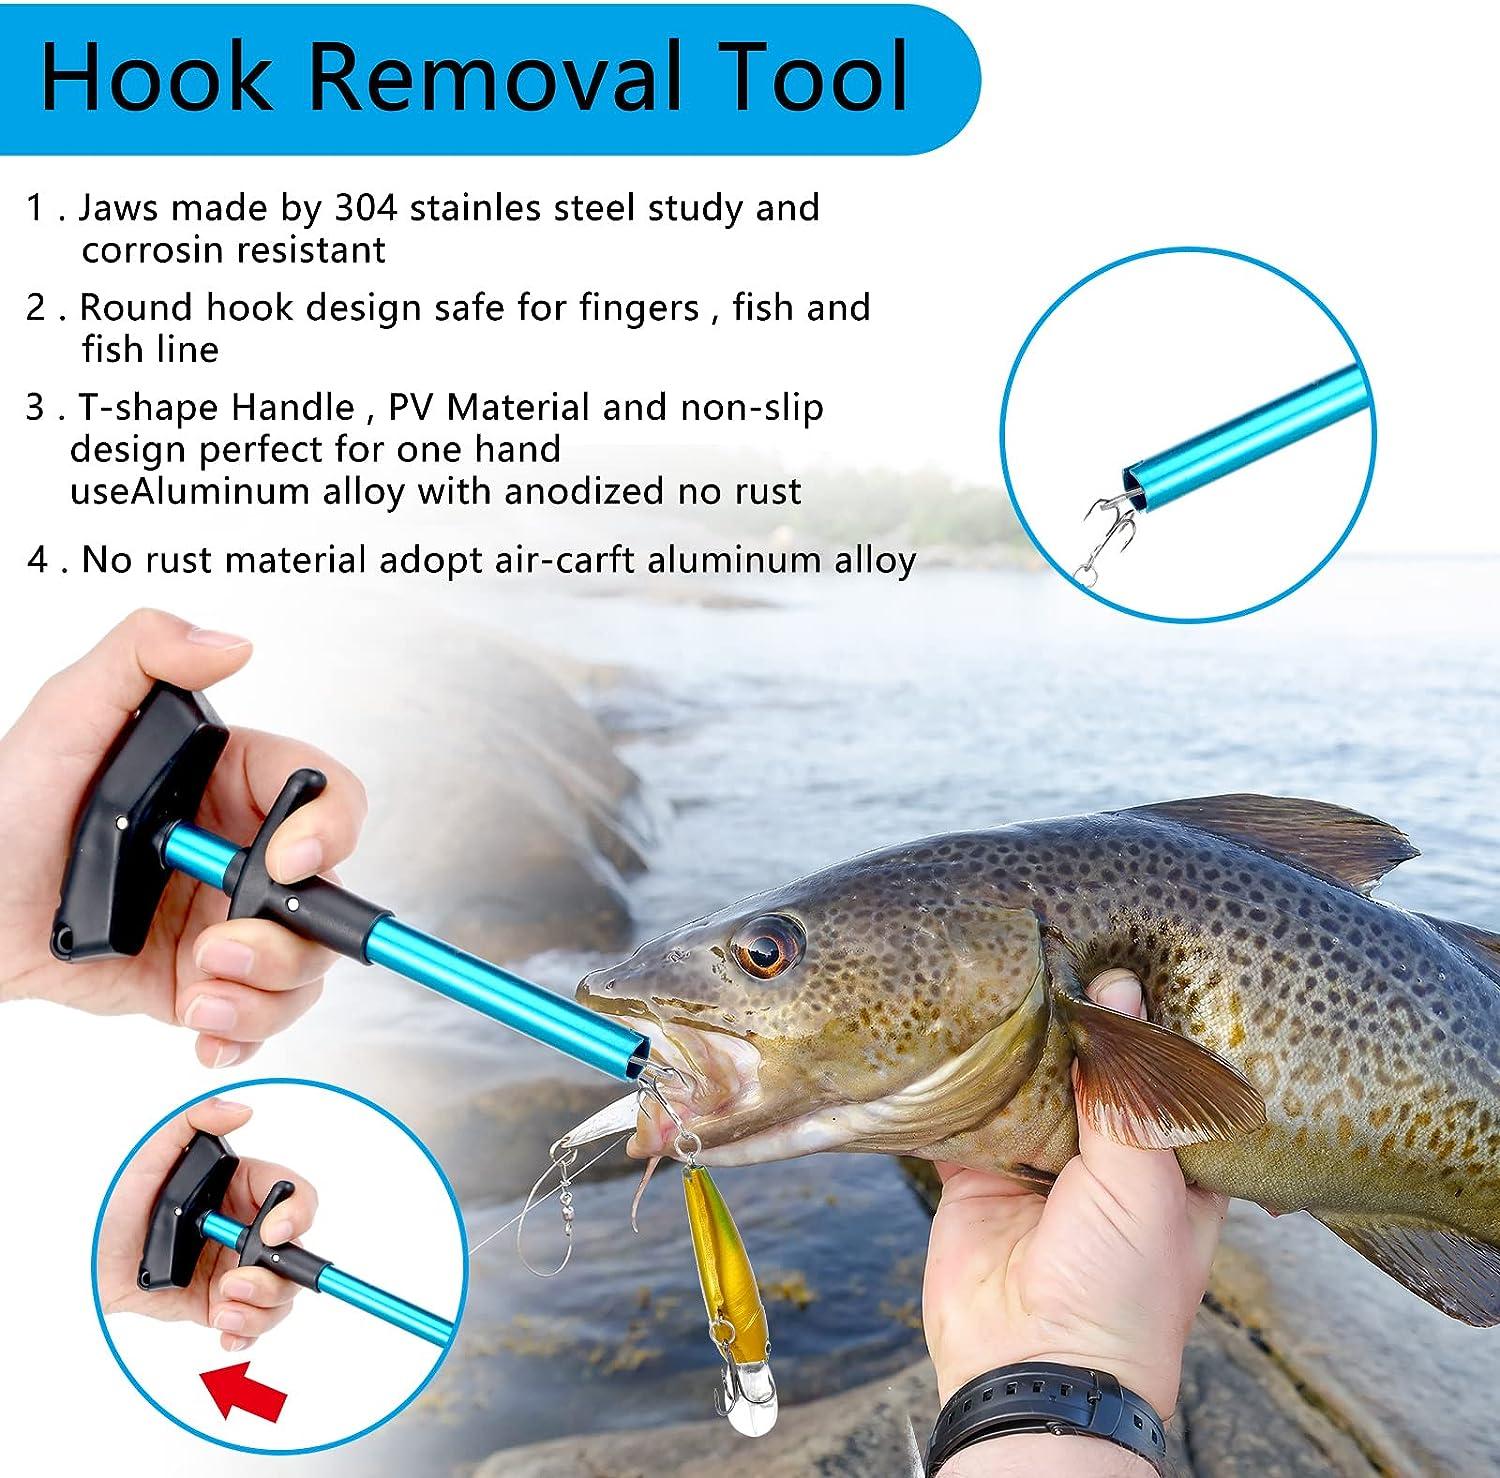 3 Inch Rapala Fish Hook Remover - Dehooker with Coil Wrist Lanyard